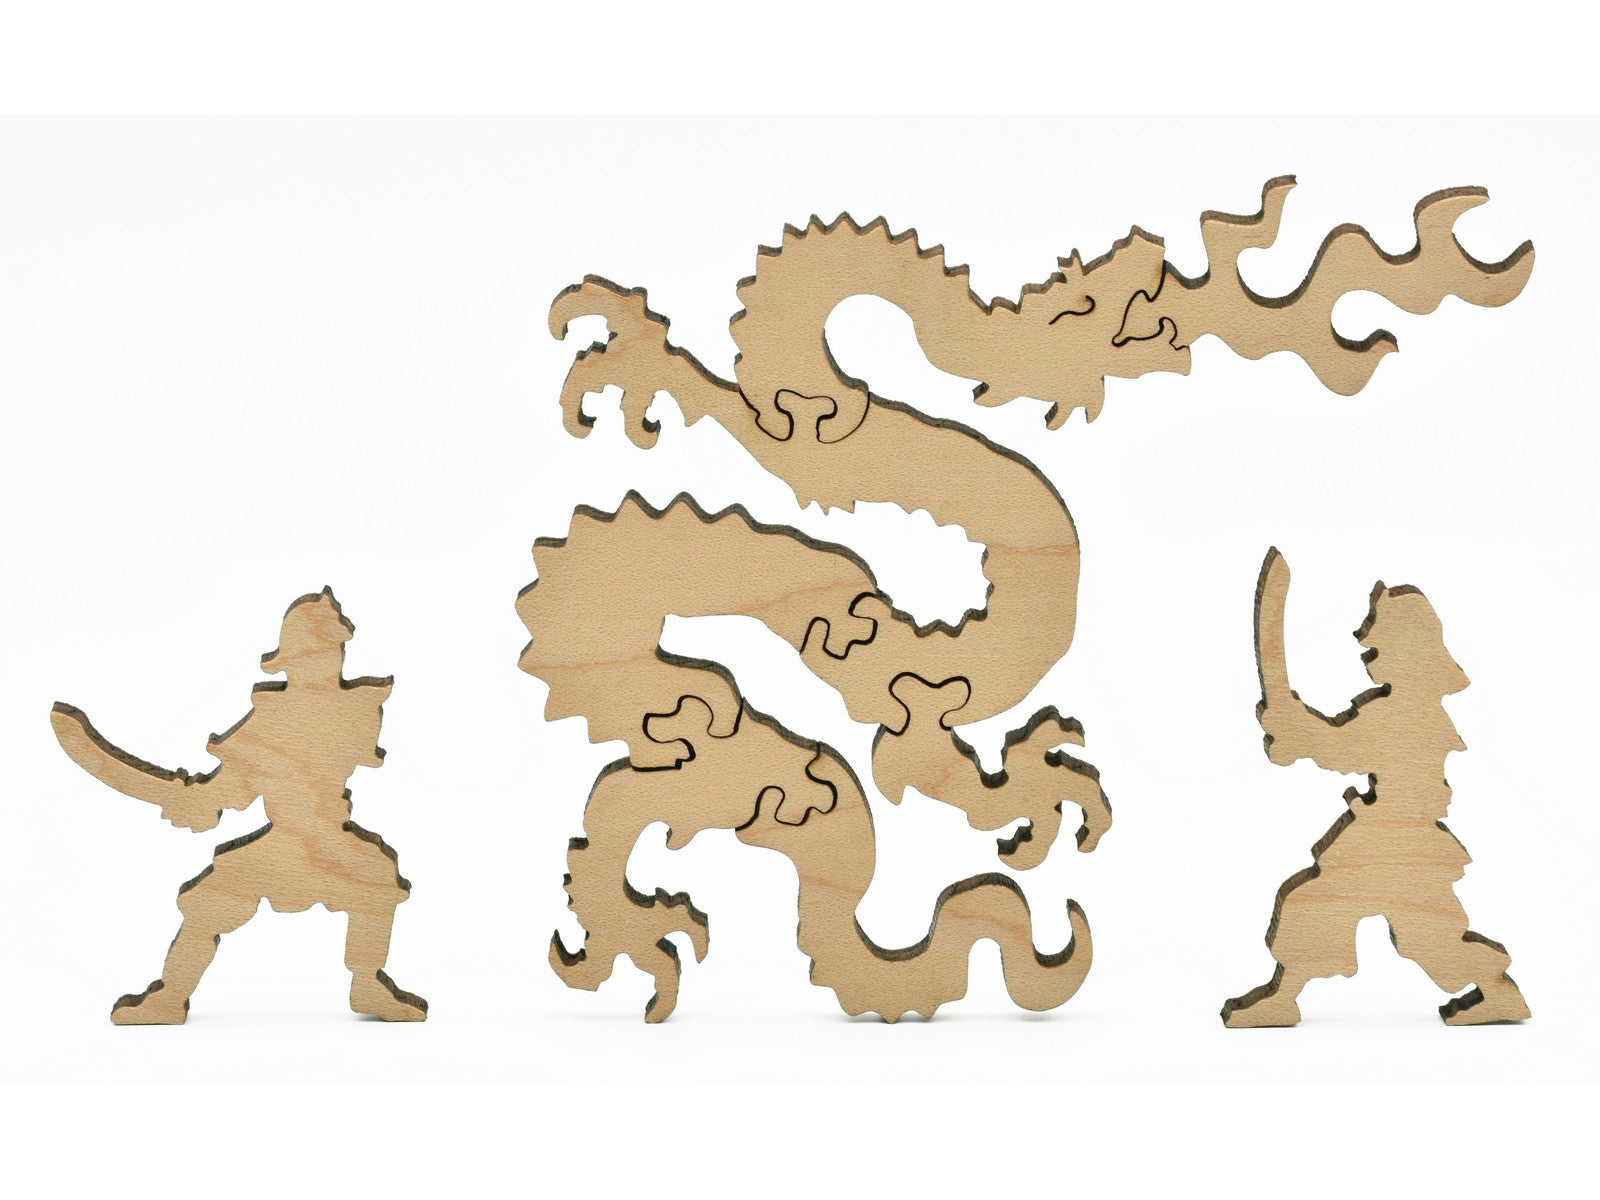 A closeup of pieces in the shape of a dragon and samurai warriors.